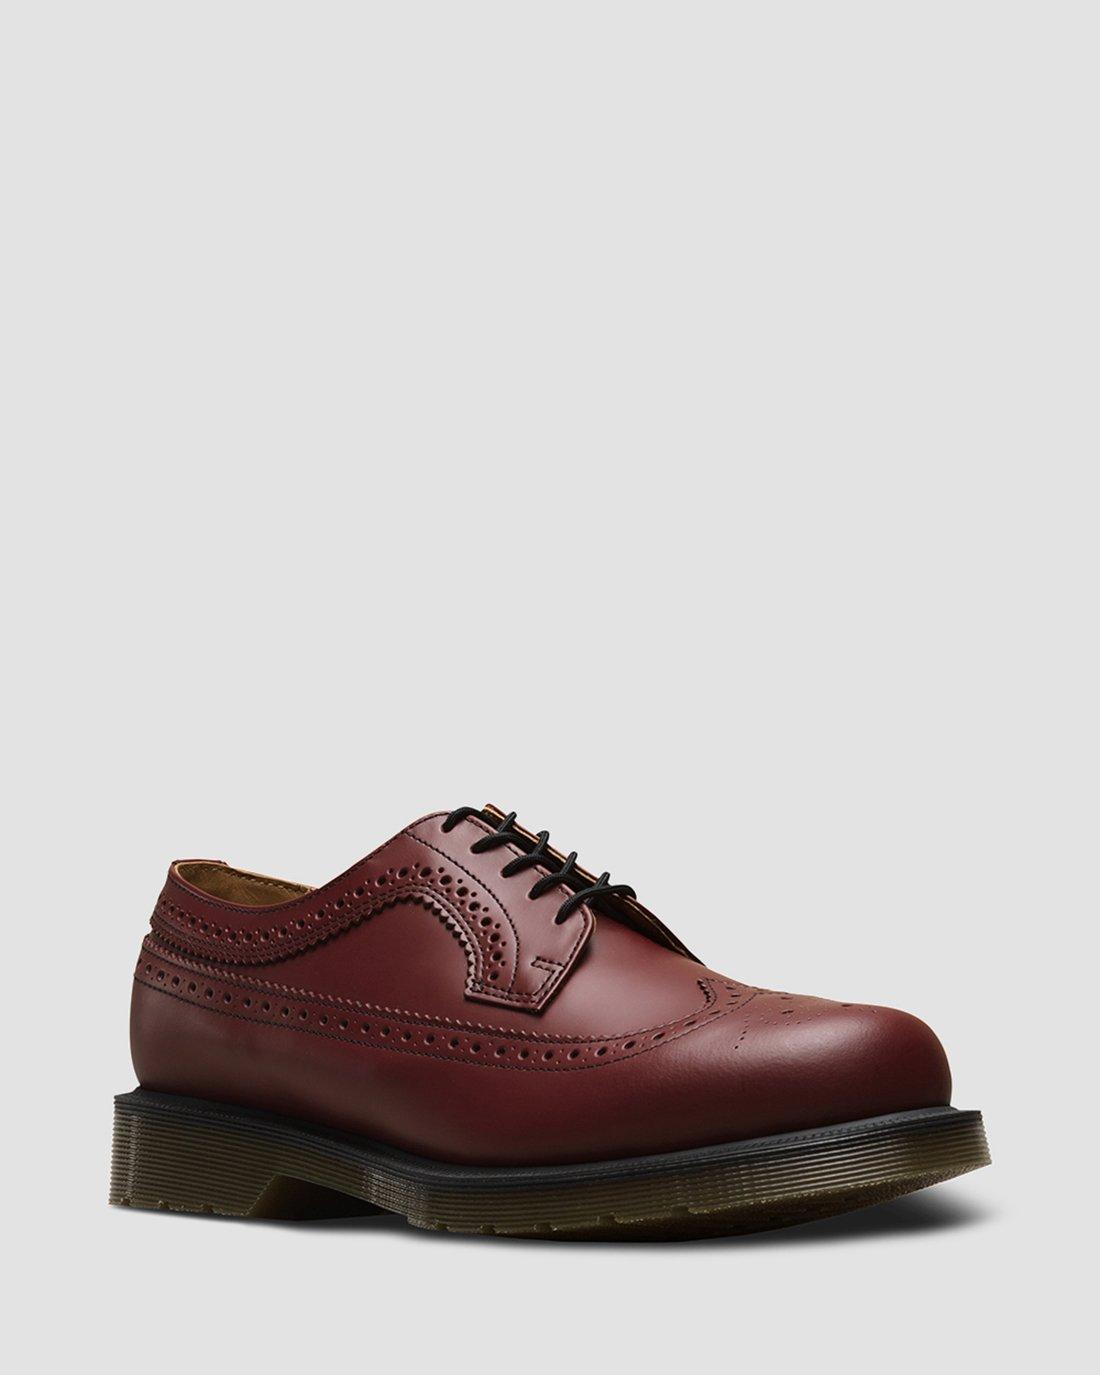 3989 Smooth Leather Brogue Shoes in Cherry Red | Dr. Martens